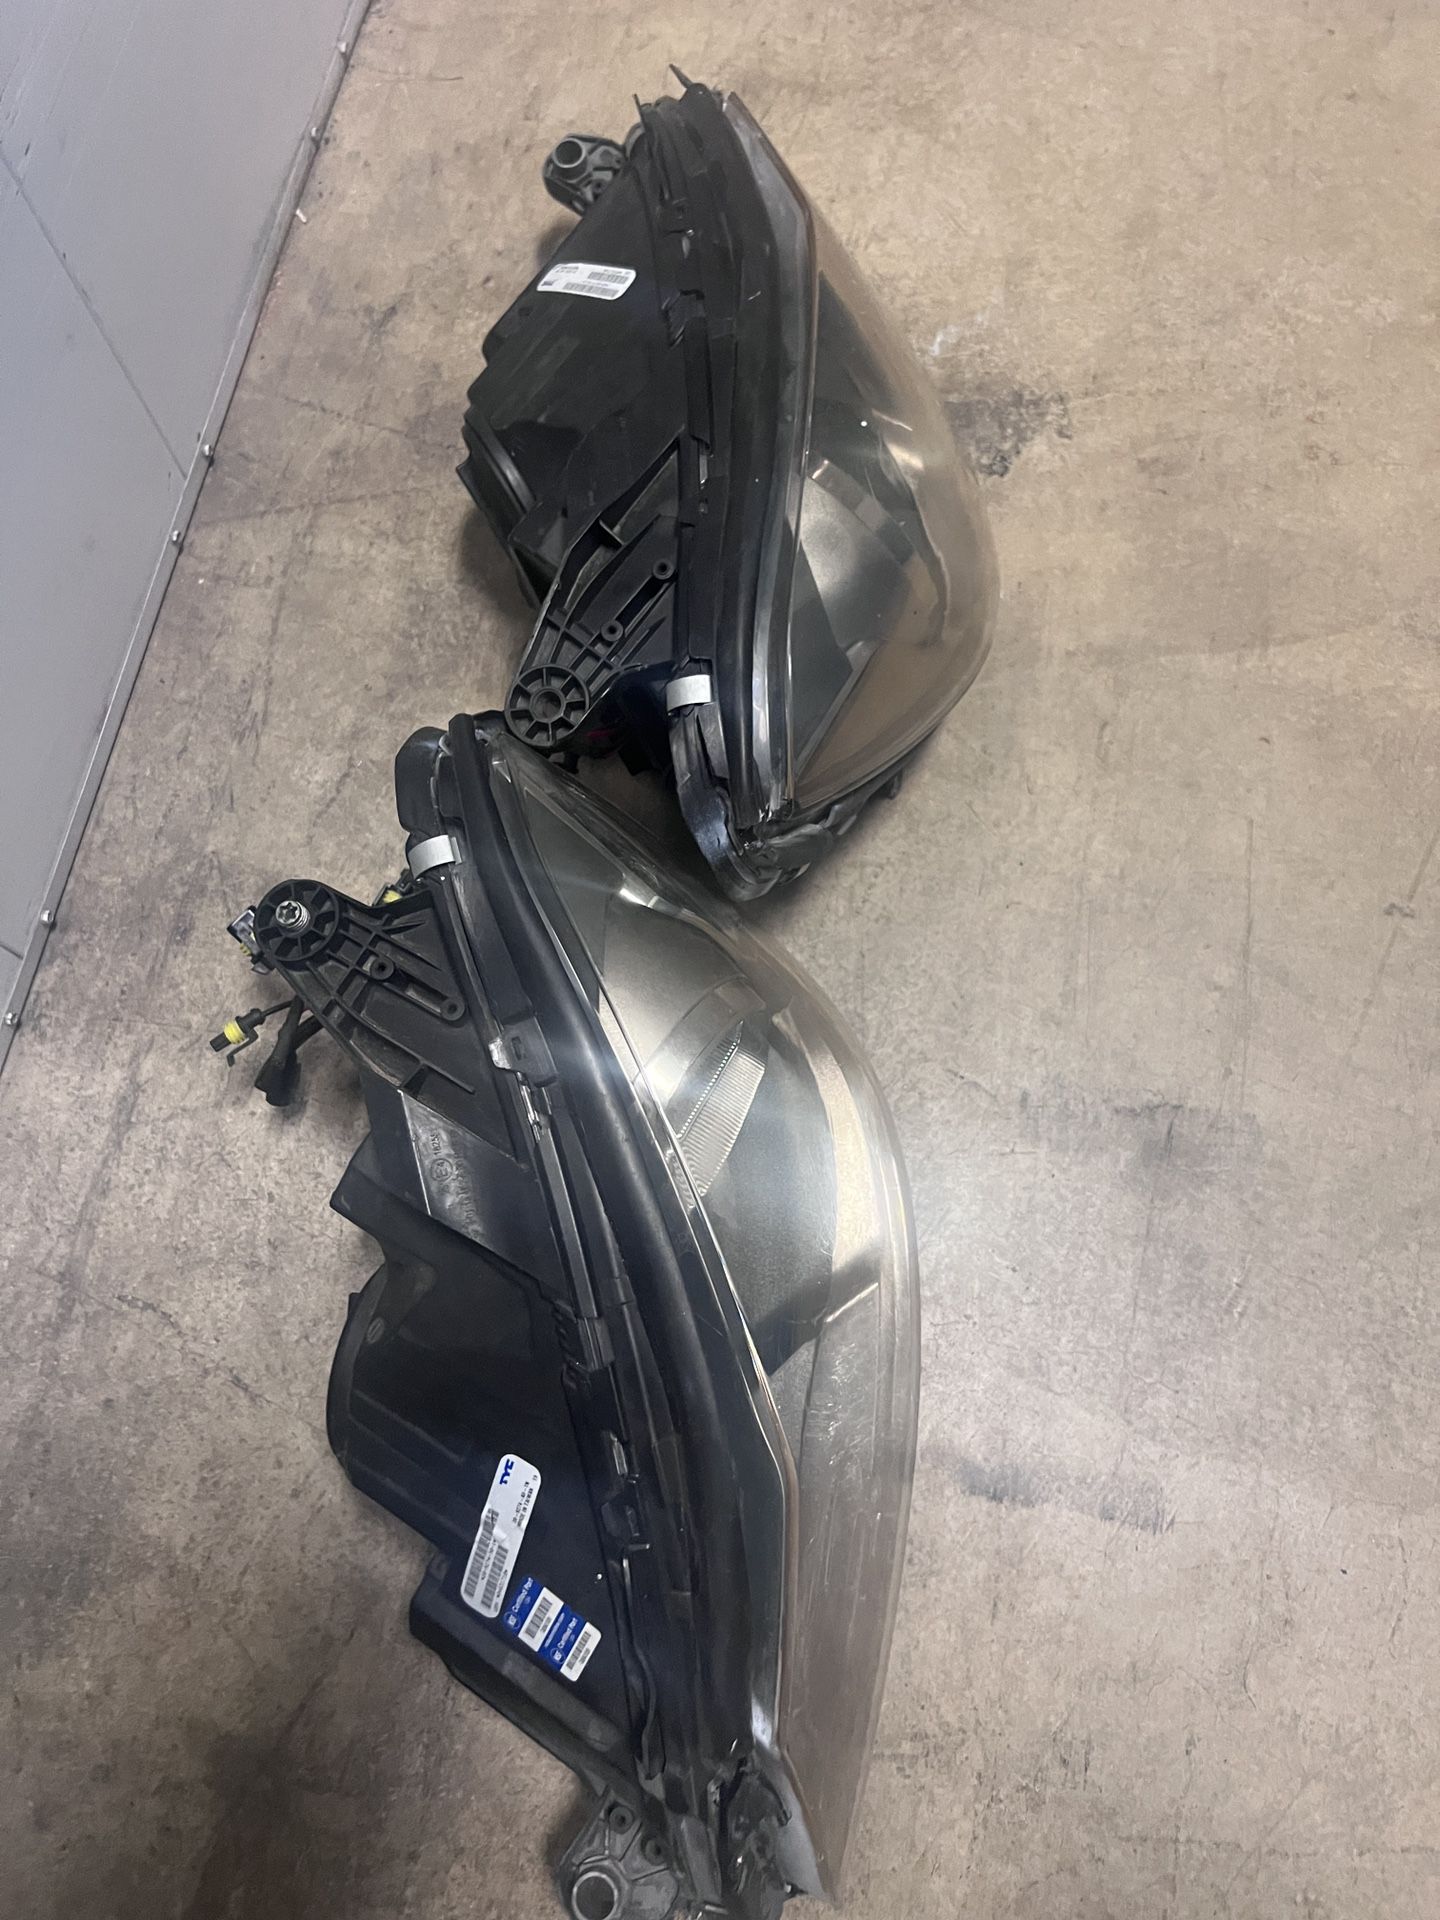 2 SETS OF MERCEDES BENZ HEADLIGHTS FOR SALE 